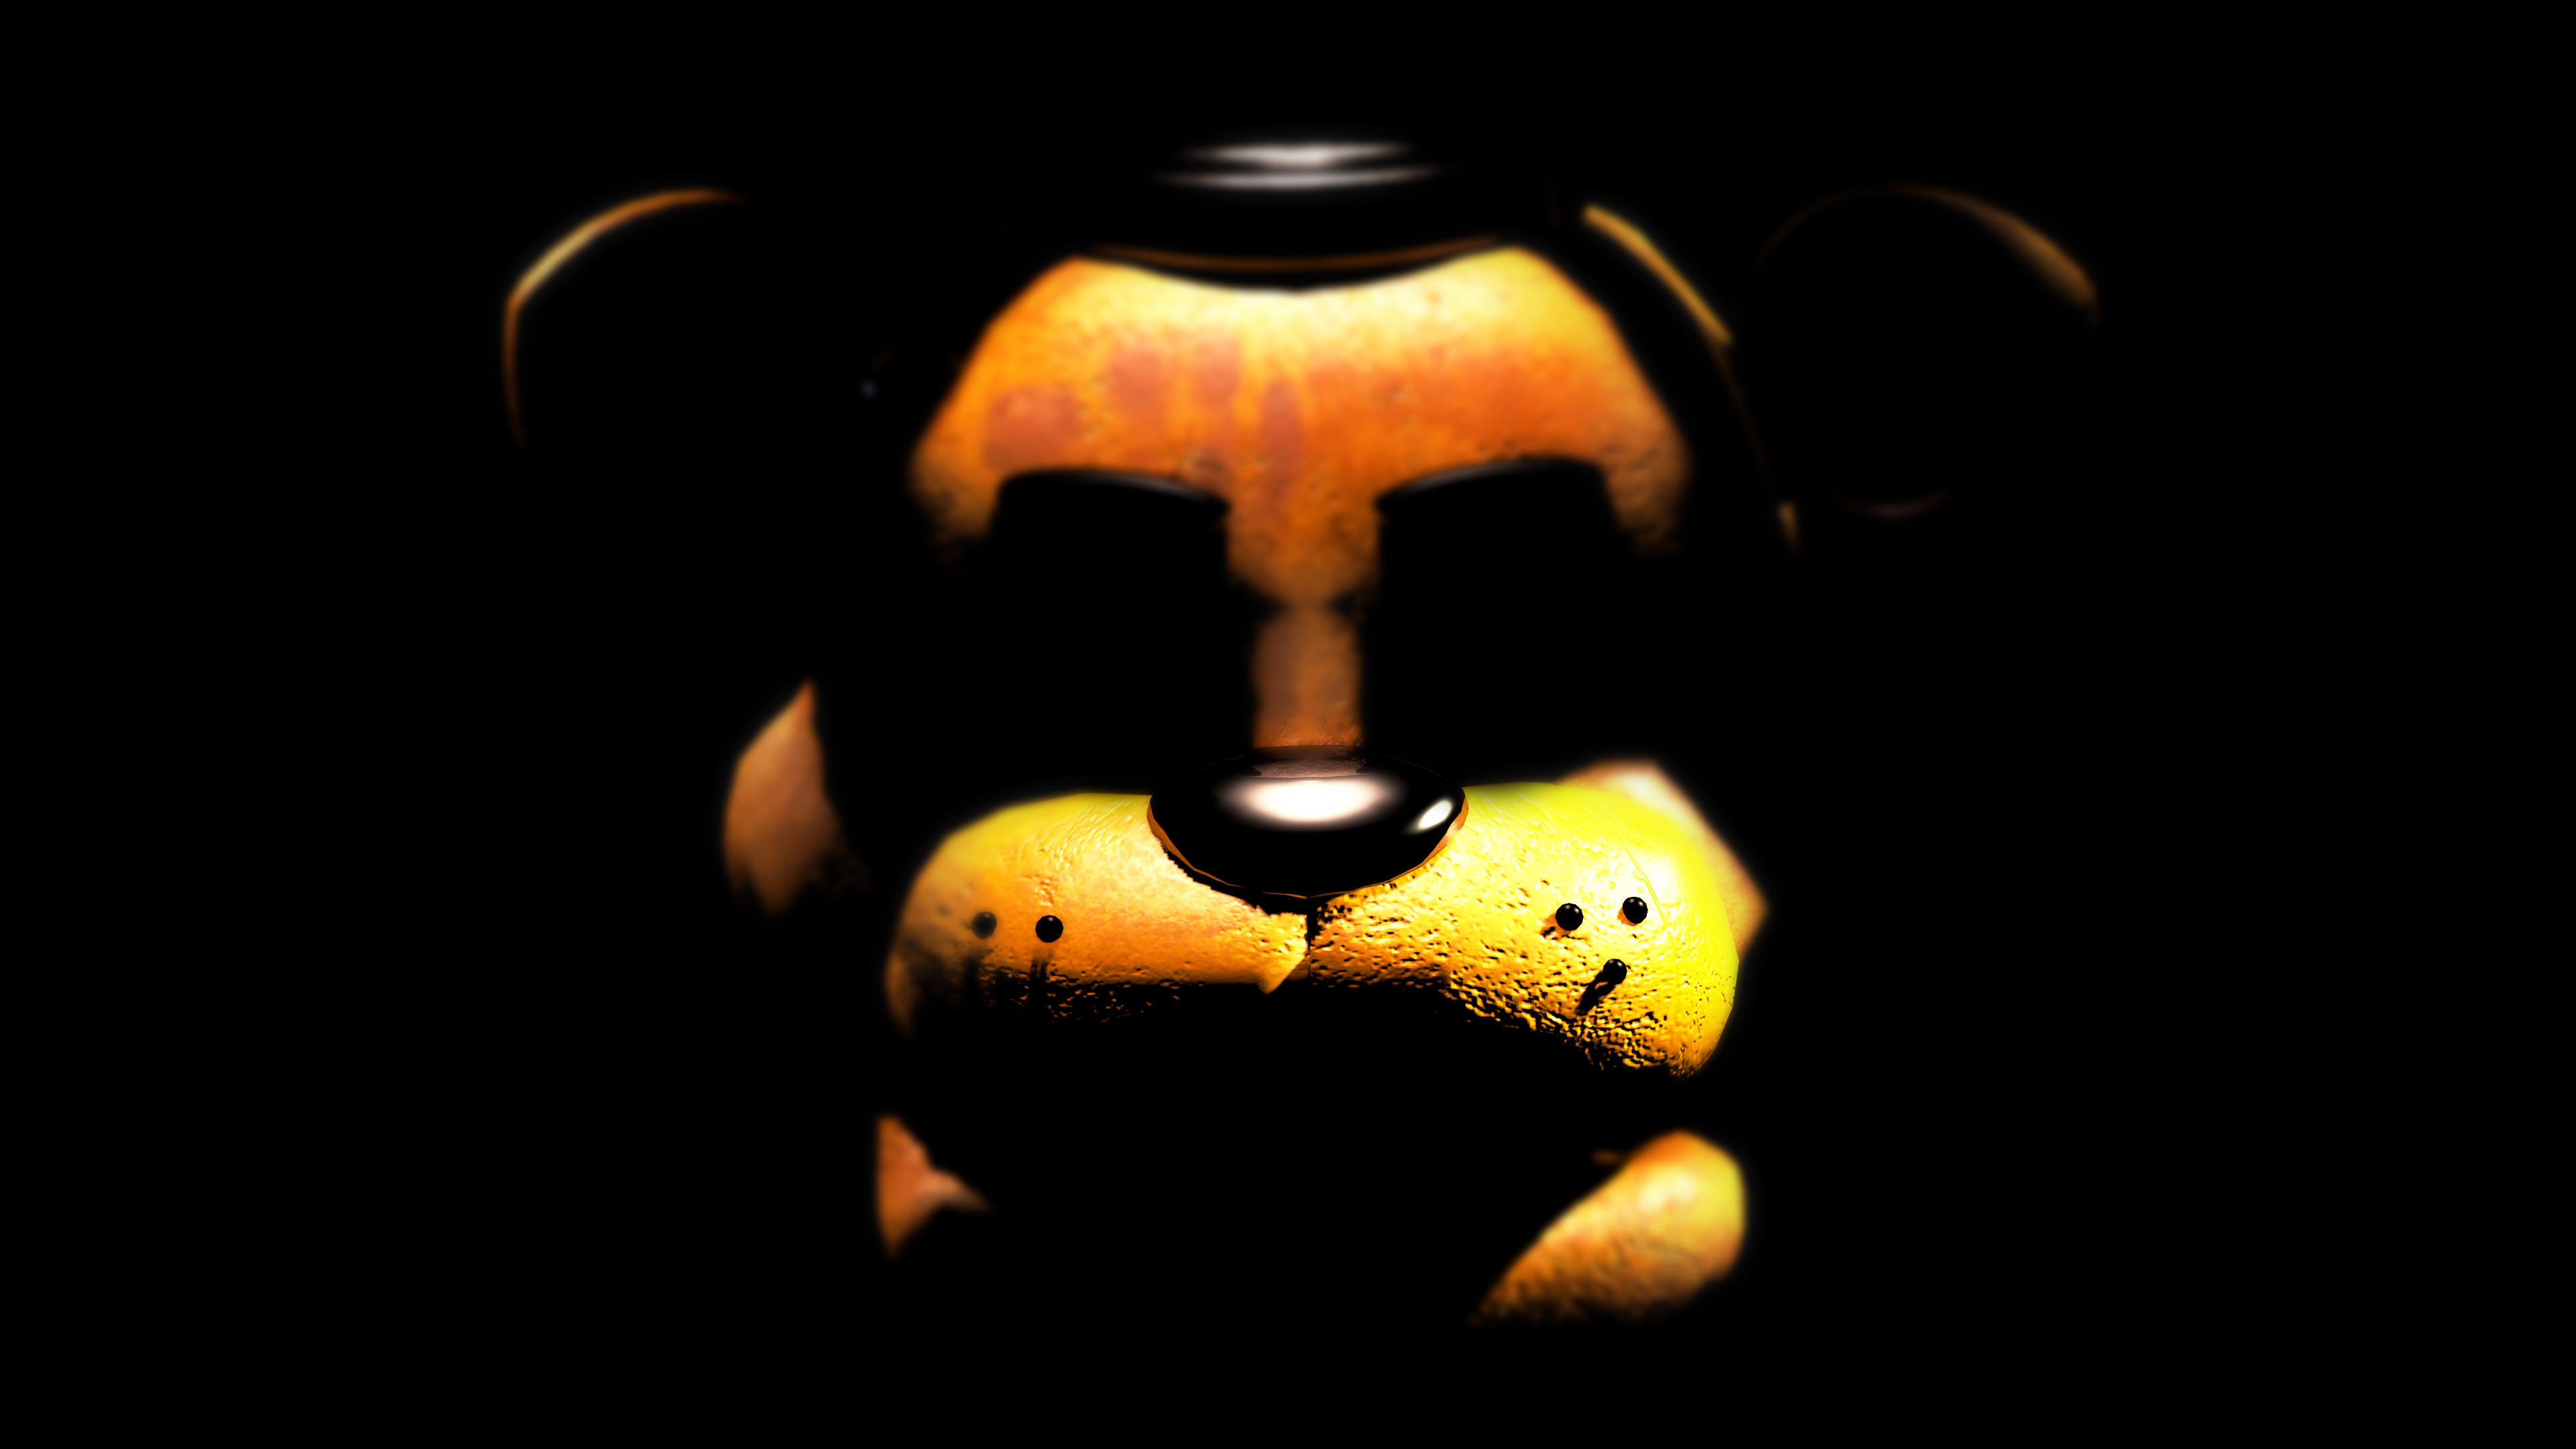 3840x2160 ... Five Nights at Freddy's | Poster/Wallpaper #1 by GravityPro